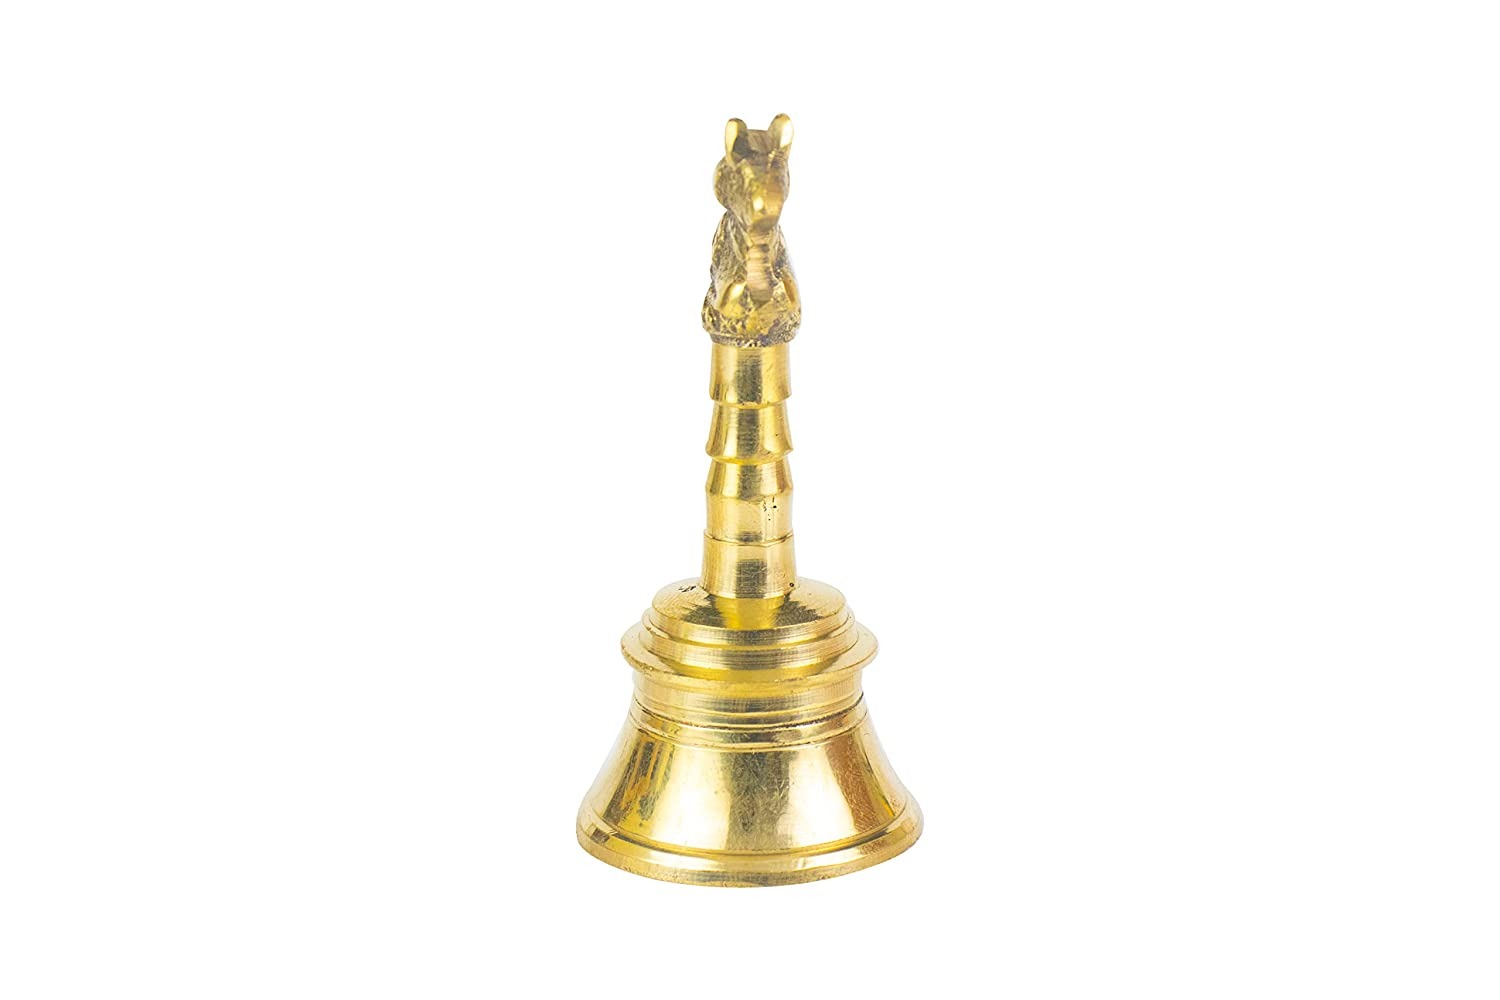 Brass Bell Ghanti for Pooja Worship For Temple Home